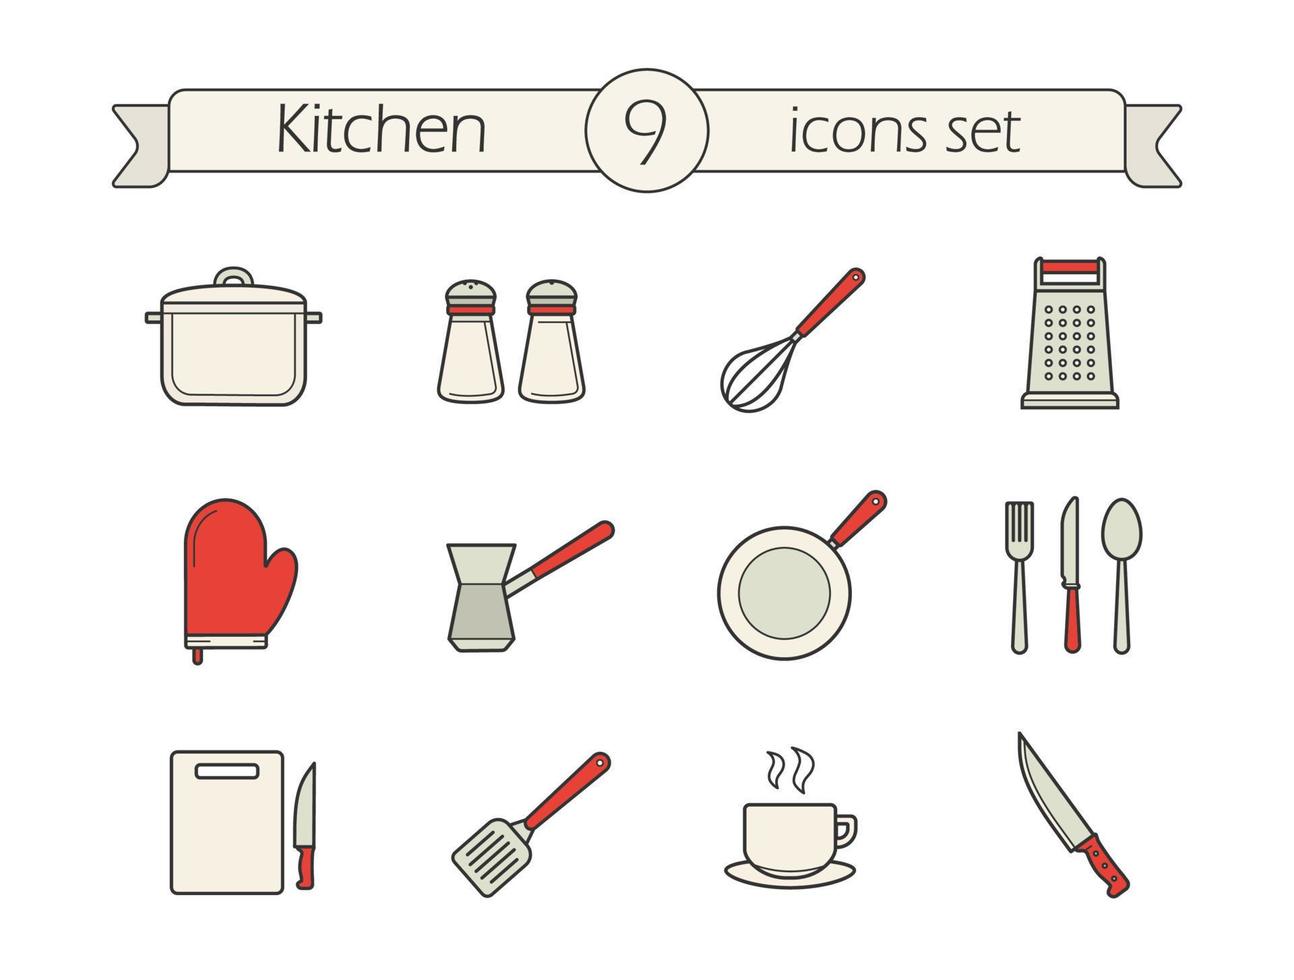 Kitchen utensils color icons set. Saucepan, salt and pepper shakers, whisk, grater, oven mitt, frying pan, fork, spoon, knife, cutting board, spatula, chef's knife. Vector isolated illustrations